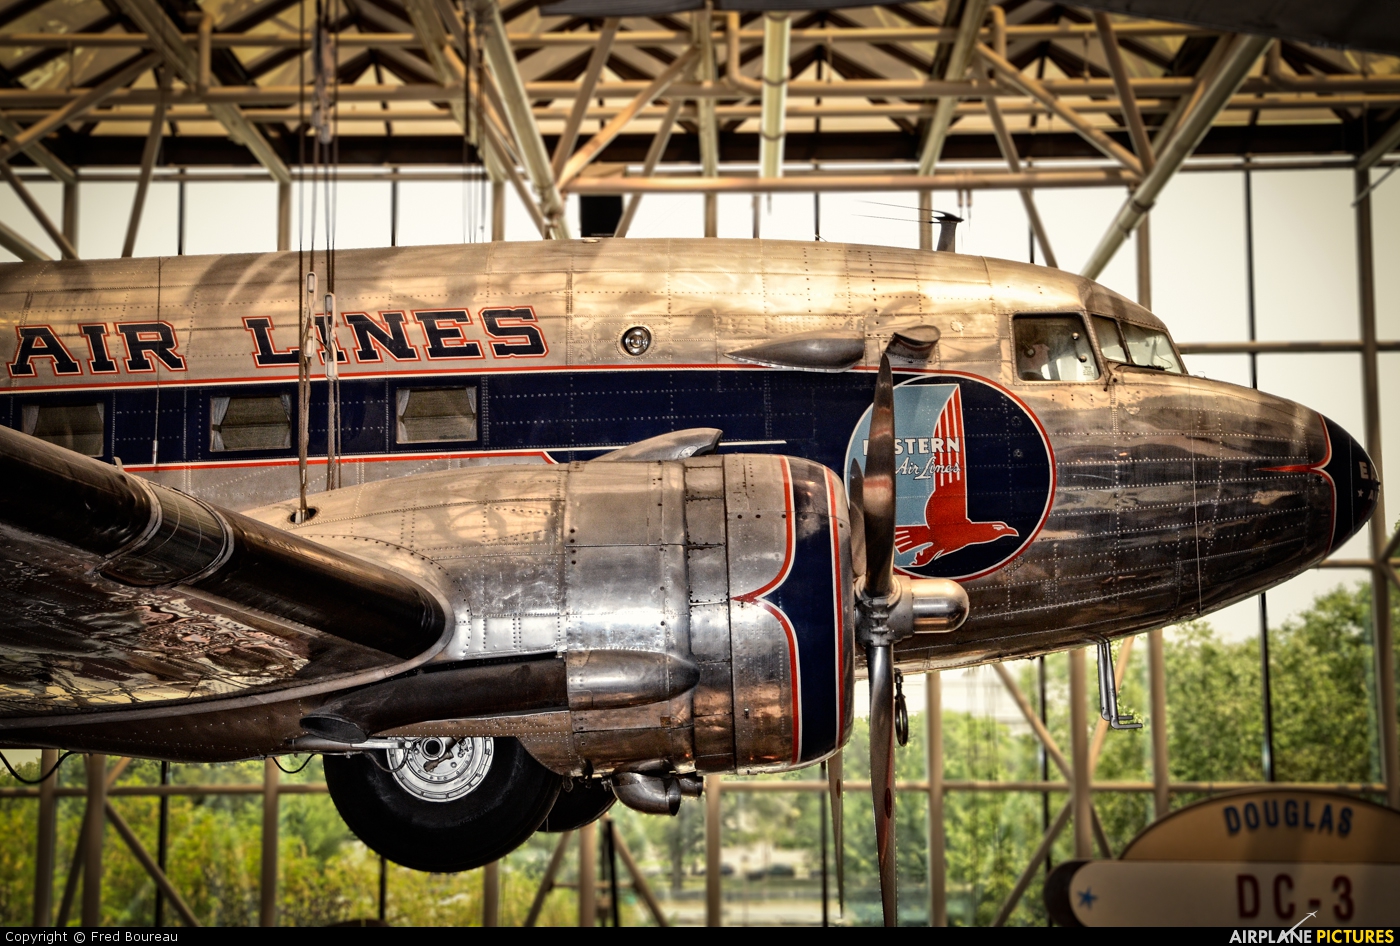 Eastern Airlines N18124 aircraft at Smithsonian National Air and Space Museum